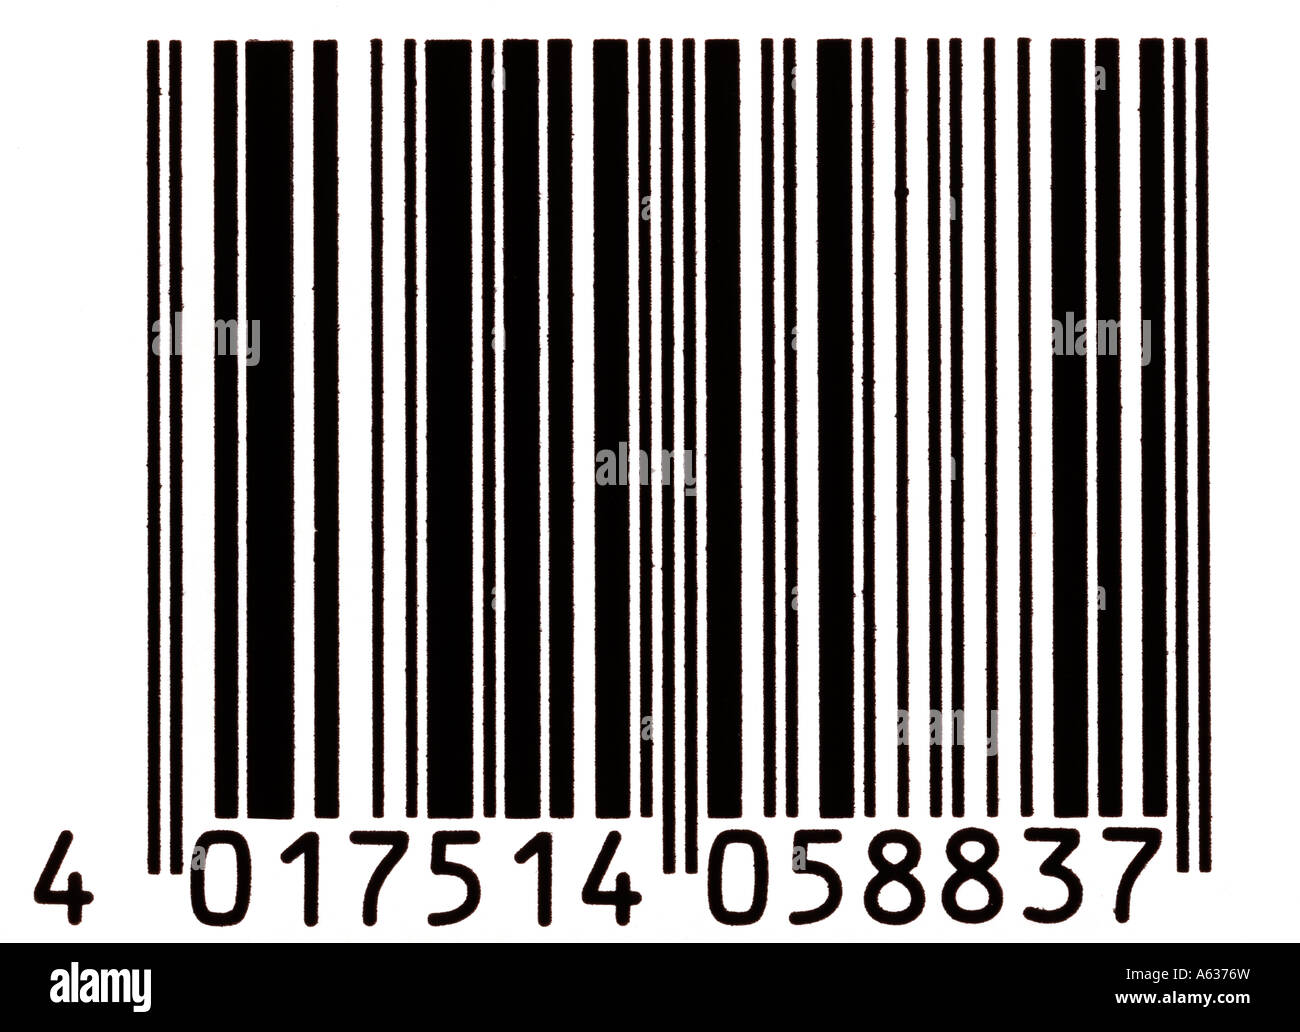 Barcode bar code. Picture by Paddy McGuinness paddymcguinness. Stock Photo